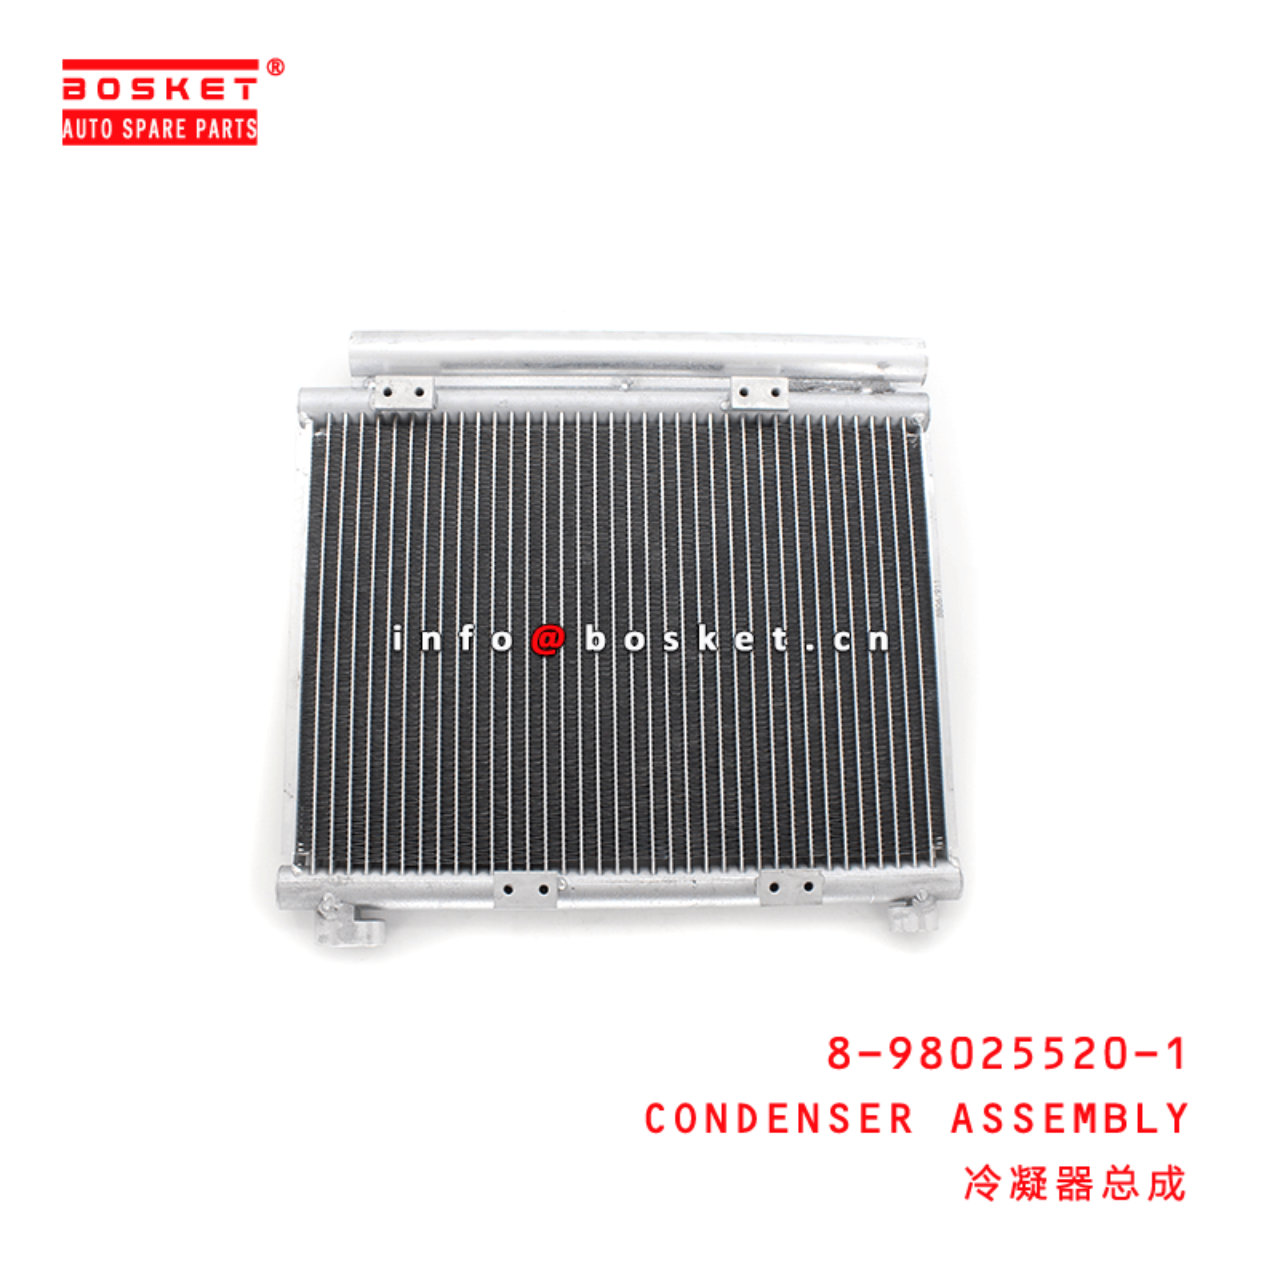 8-98025520-1 Condenser Assembly 8980255201 Suitable for ISUZU 700P 4HK1